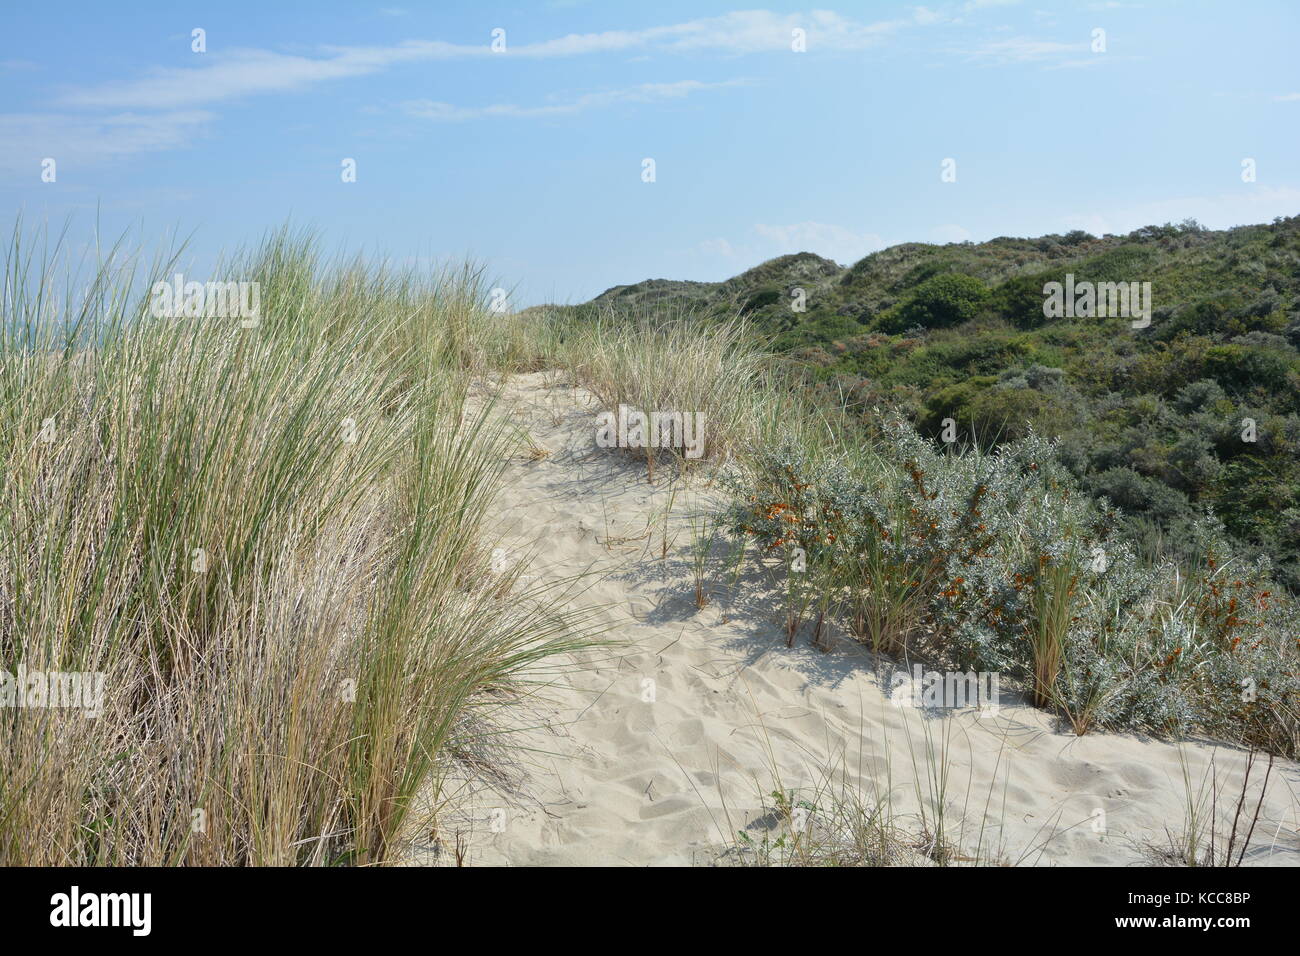 Scenery behind the sandy dunes on the North Sea coast in the Netherlands on the island Schouwen-Duiveland Stock Photo